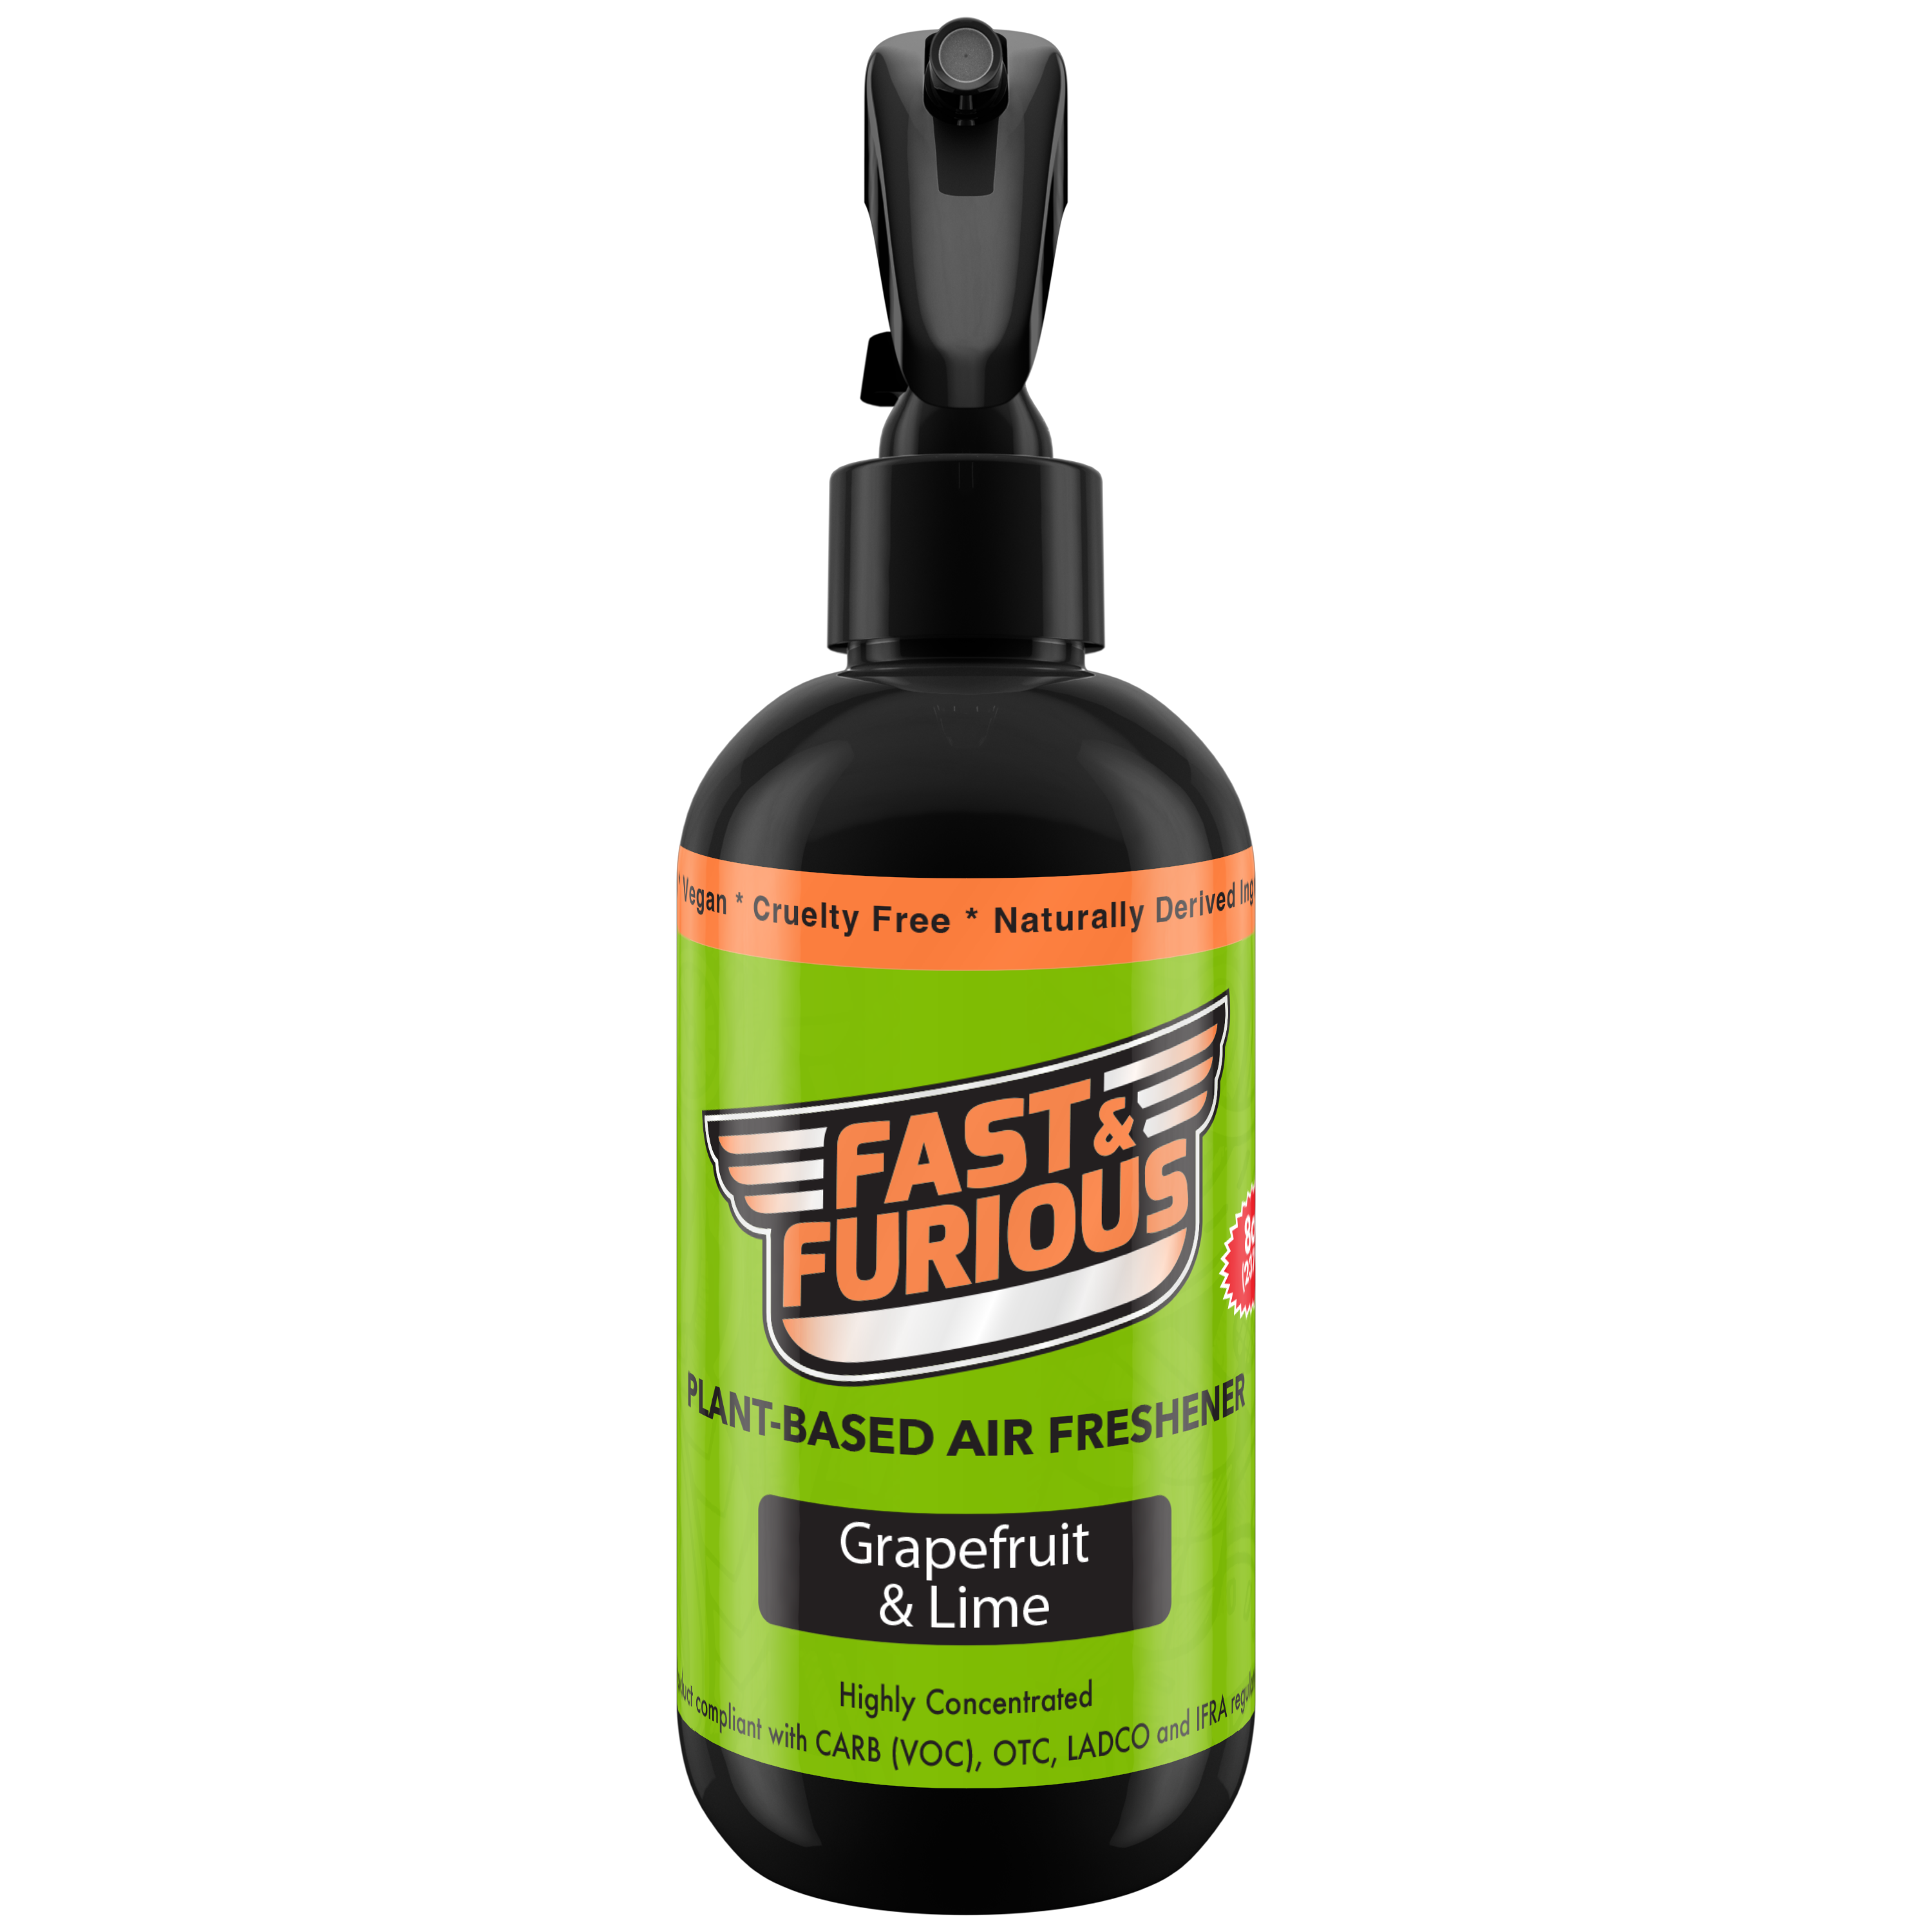 Fast and Furious Plant-Based Air Freshener - Grapefruit & Lime Scent